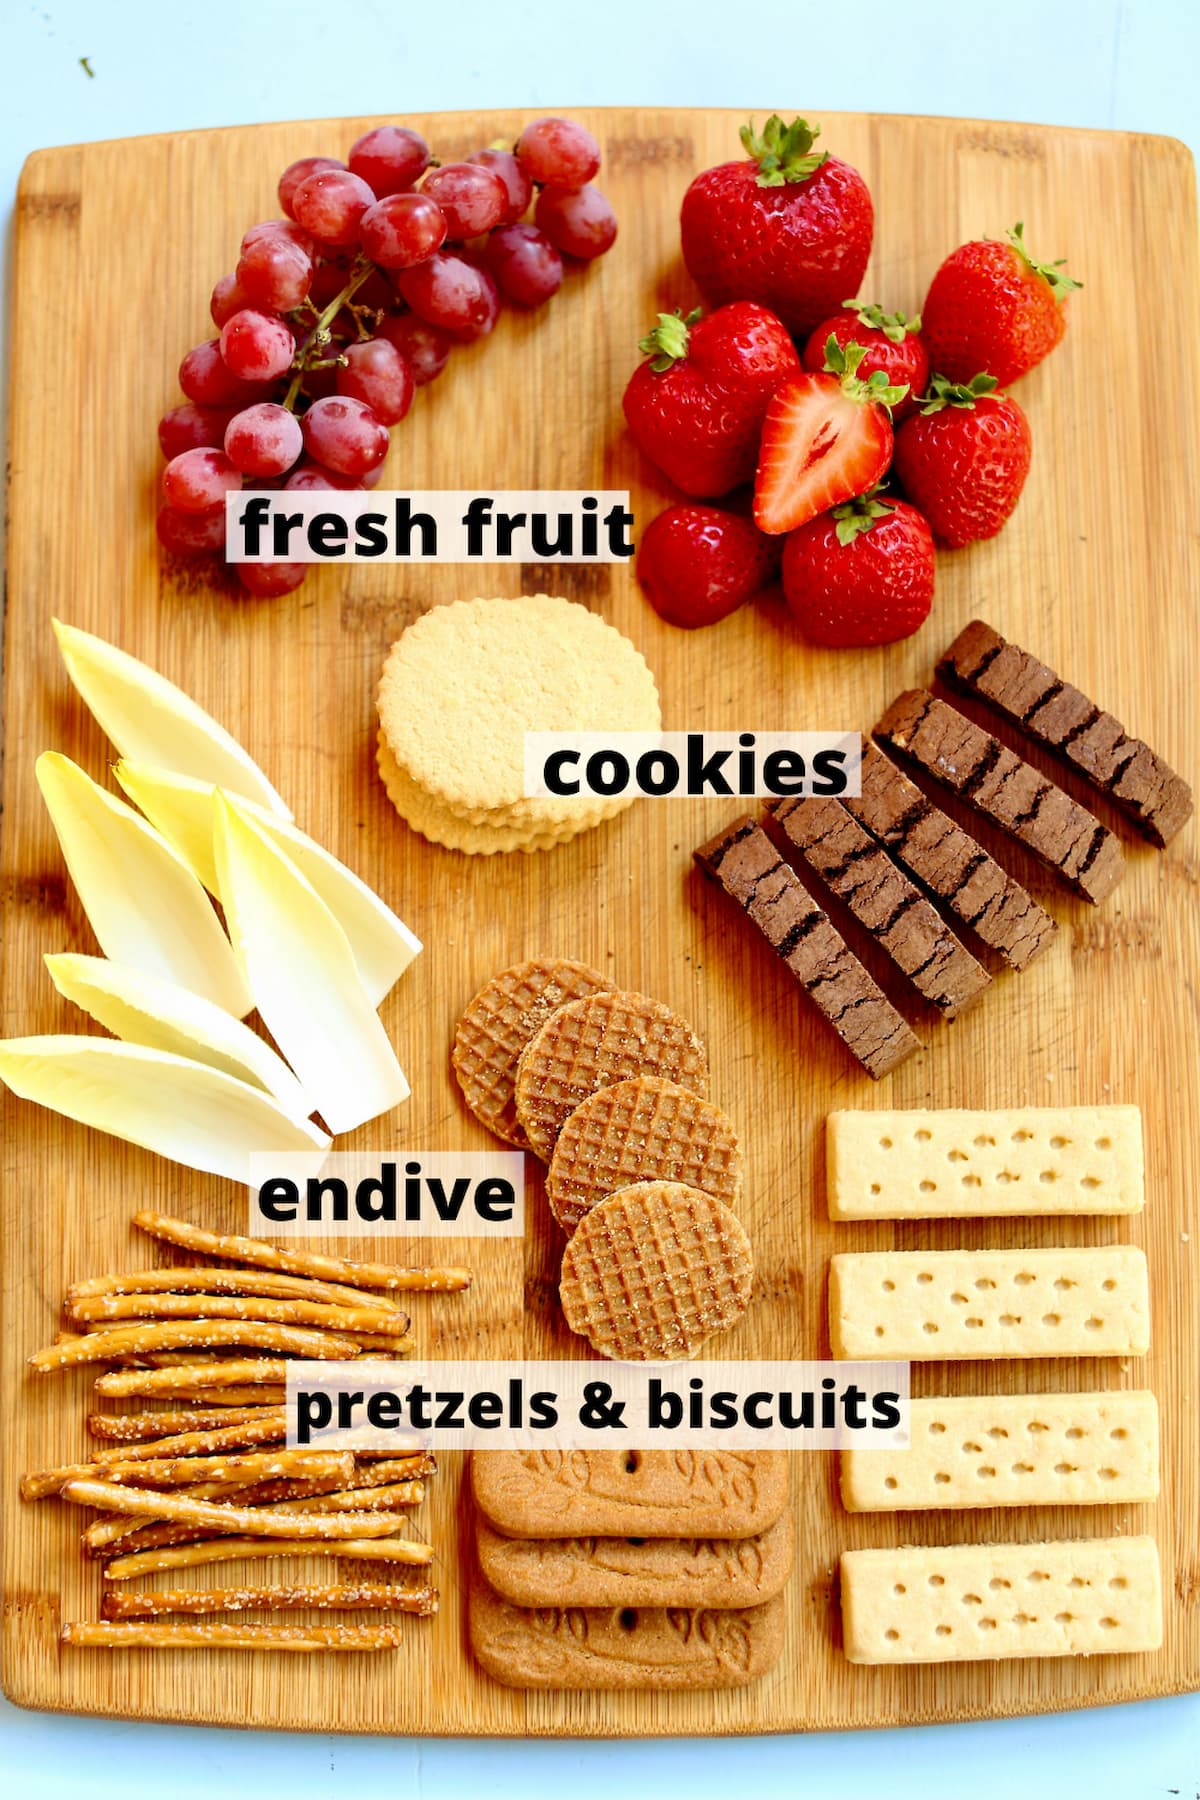 a wooden table with ingredents, fresh fruit, cookies, etc. with a text overlay saying the ingredient name.